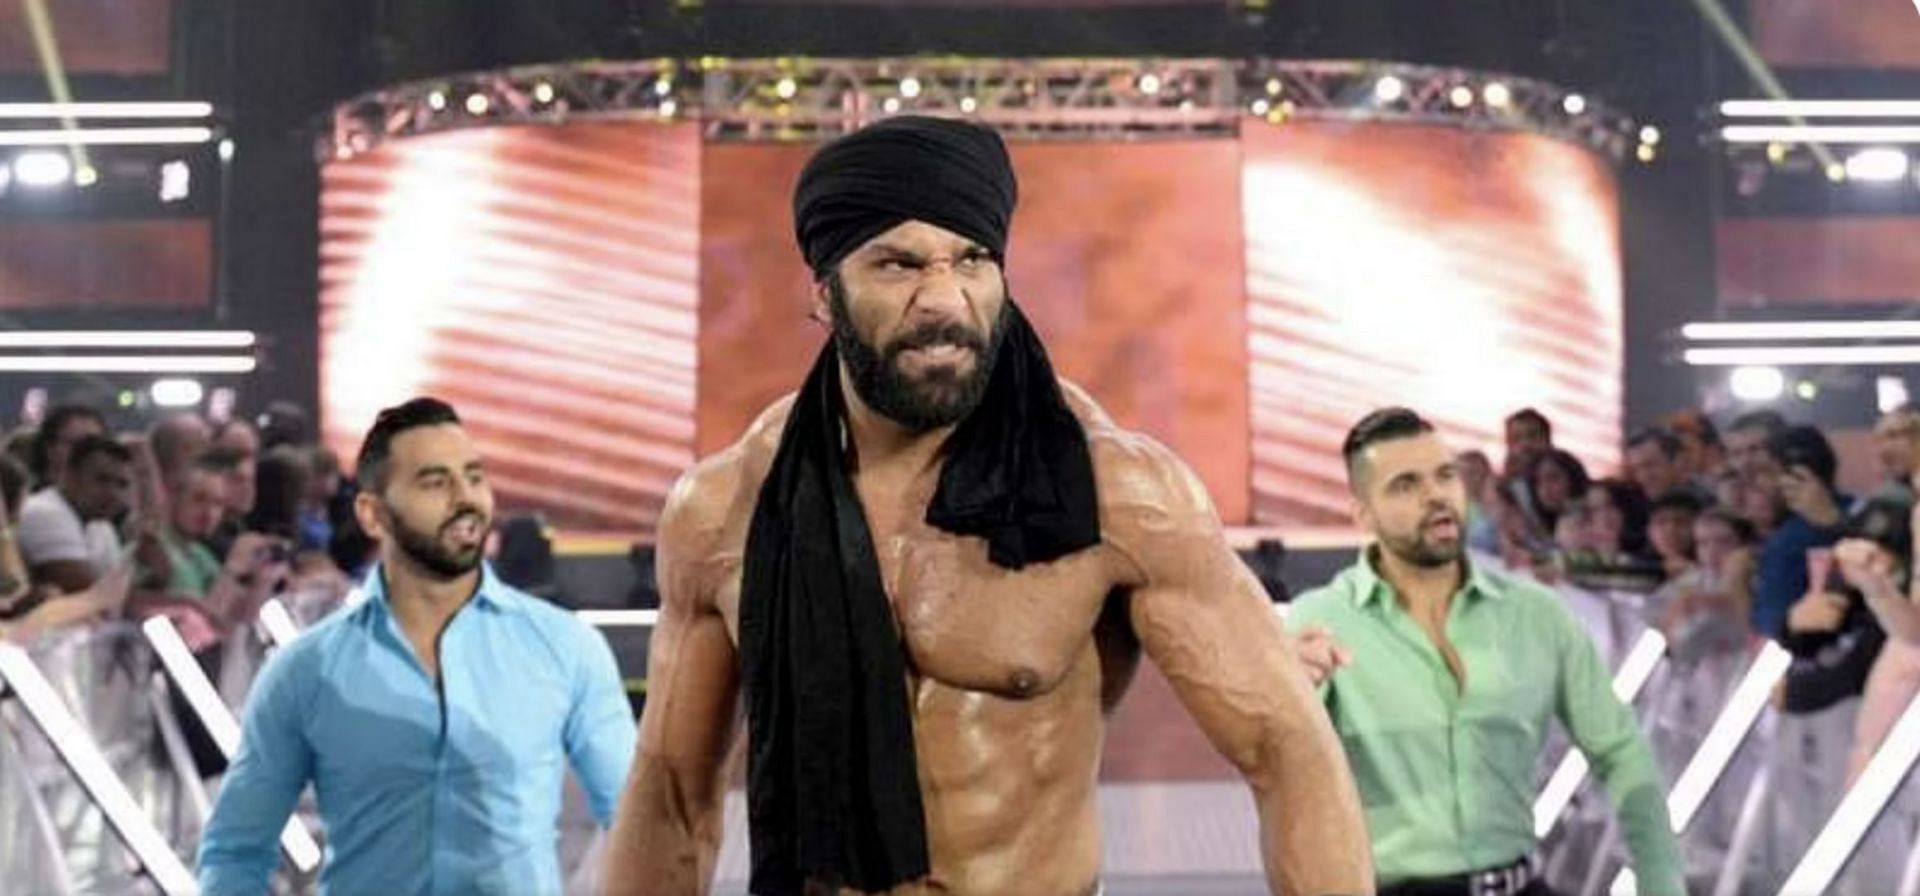 Jinder Mahal held the WWE Championship for 170 days